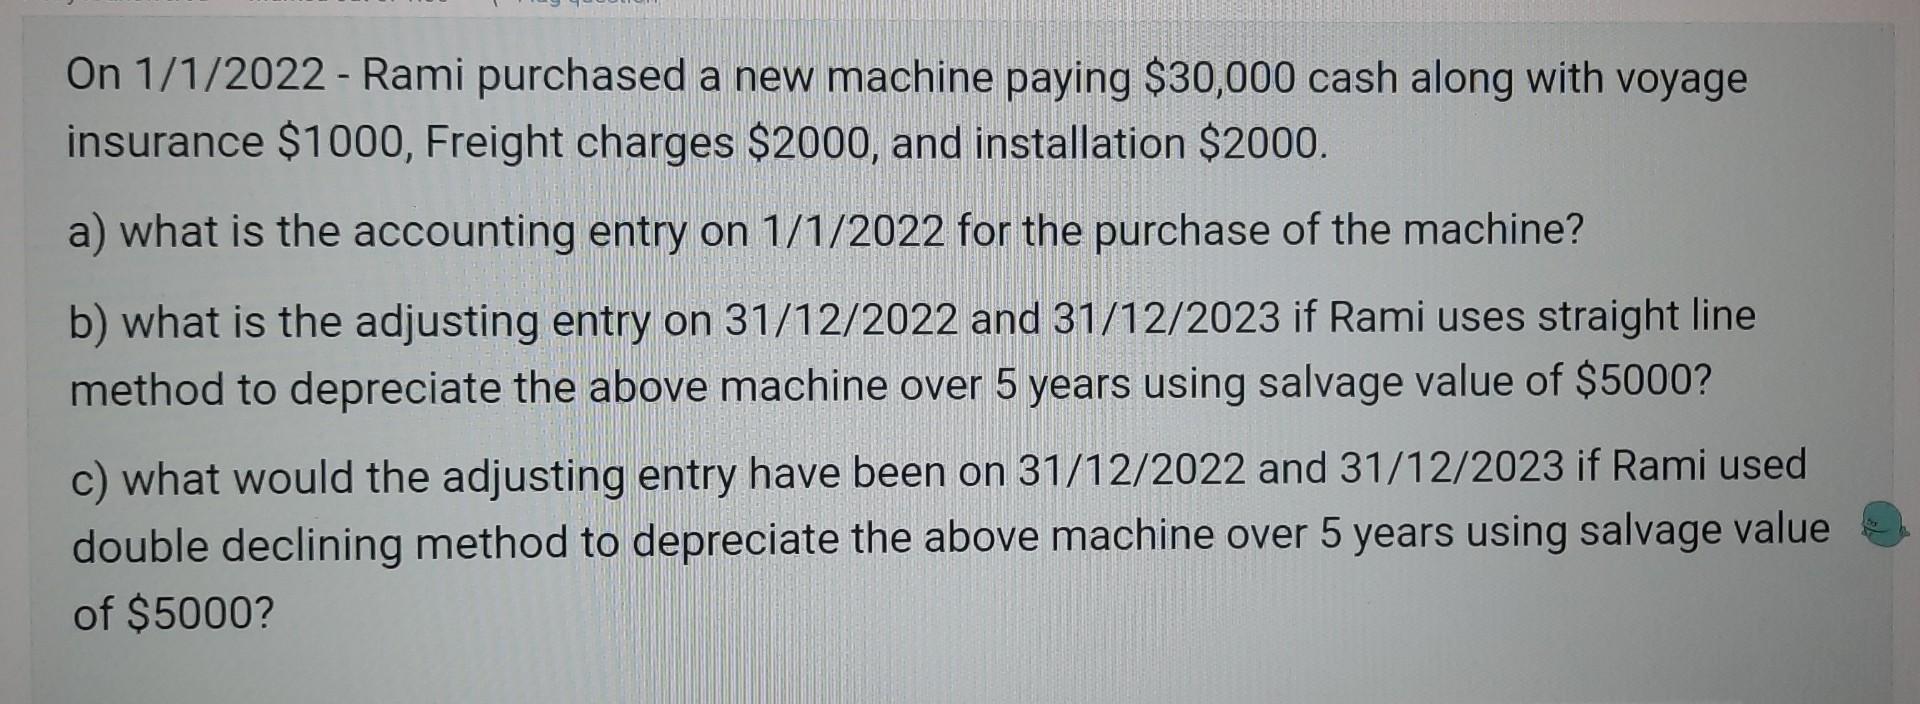 On ( 1 / 1 / 2022 ) - Rami purchased a new machine paying ( $ 30,000 ) cash along with voyage insurance ( $ 1000 ), F